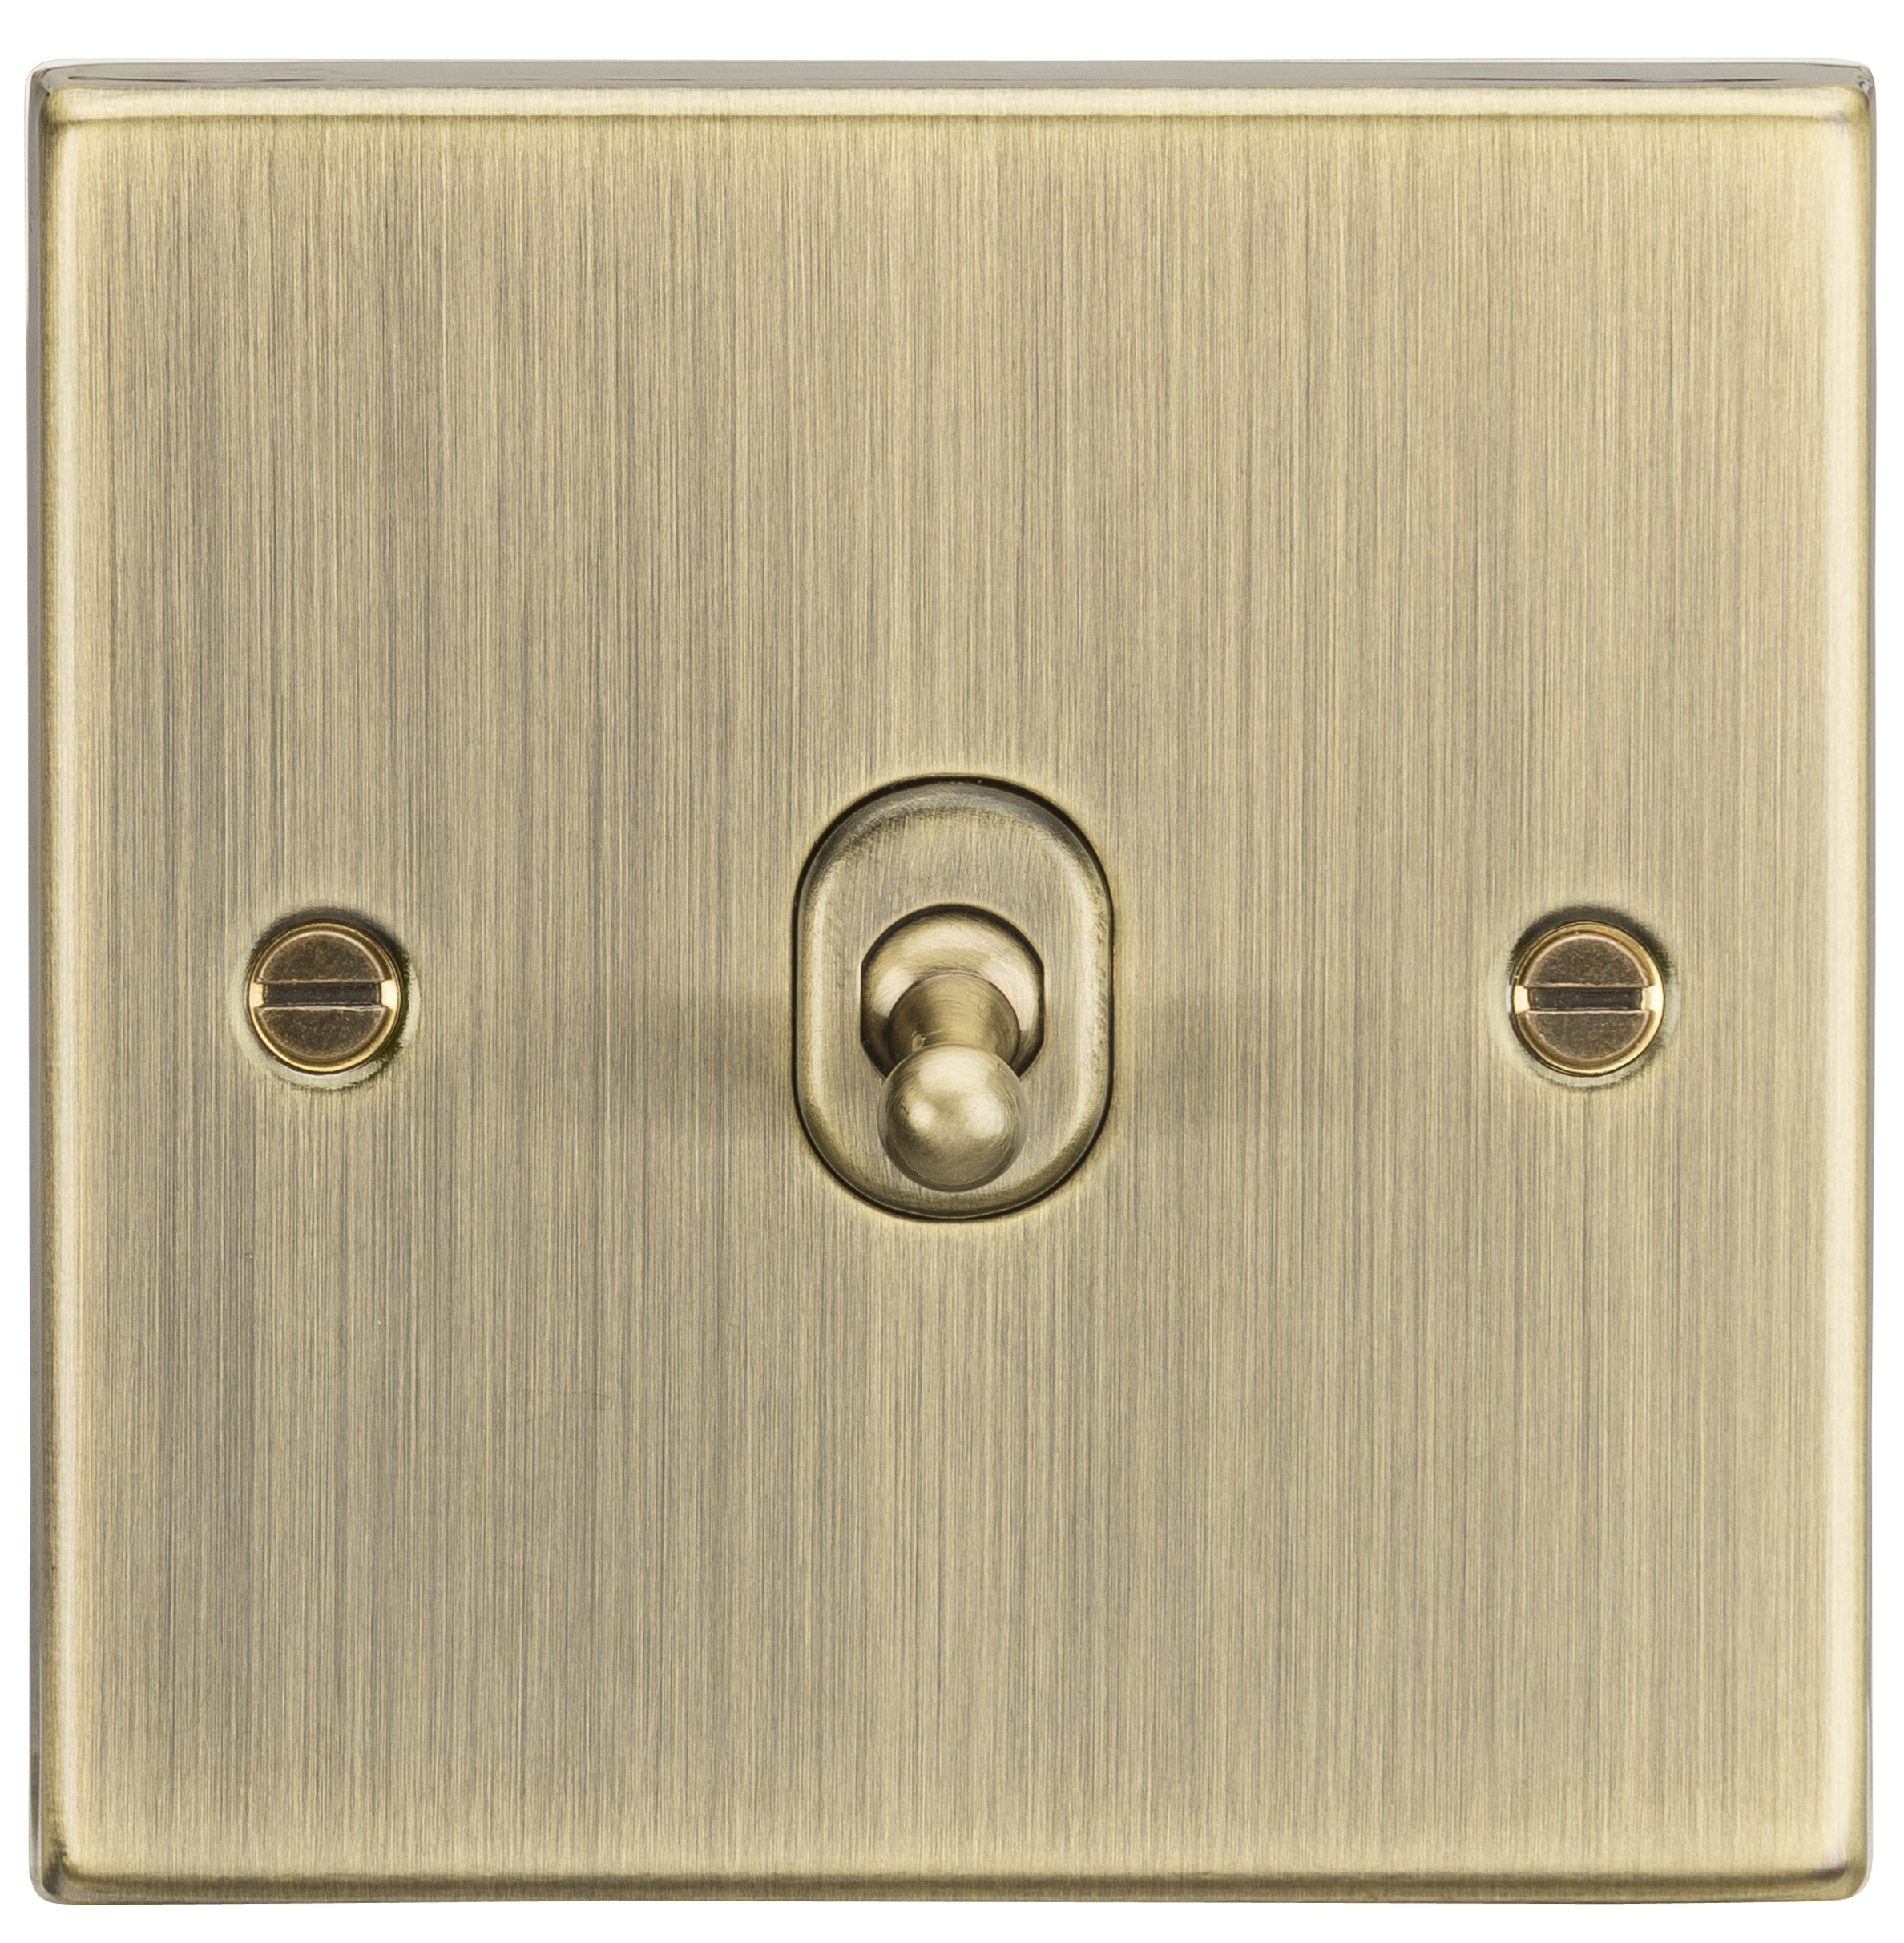 10A 1G 2 Way Toggle Switch - Square Edge Antique Brass - CSTOG1AB 